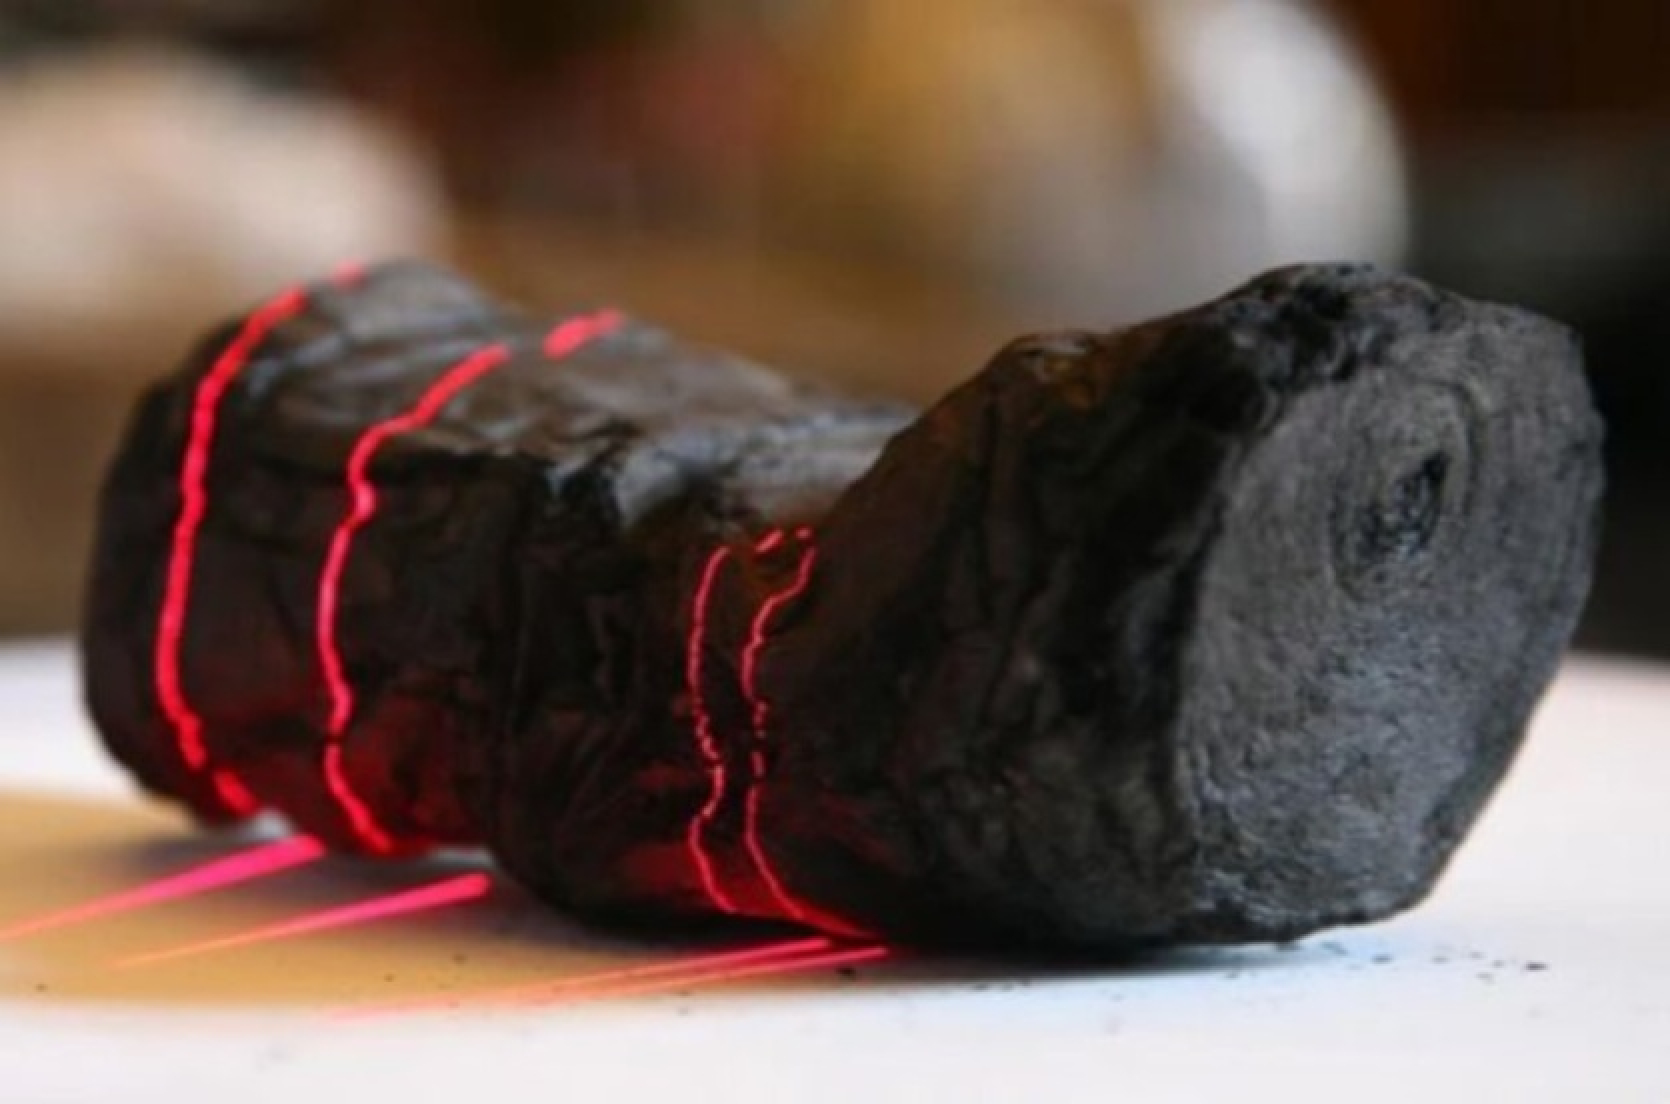 Herculaneum scrolls revealed where Plato was buried - they were read by a "bionic eye"